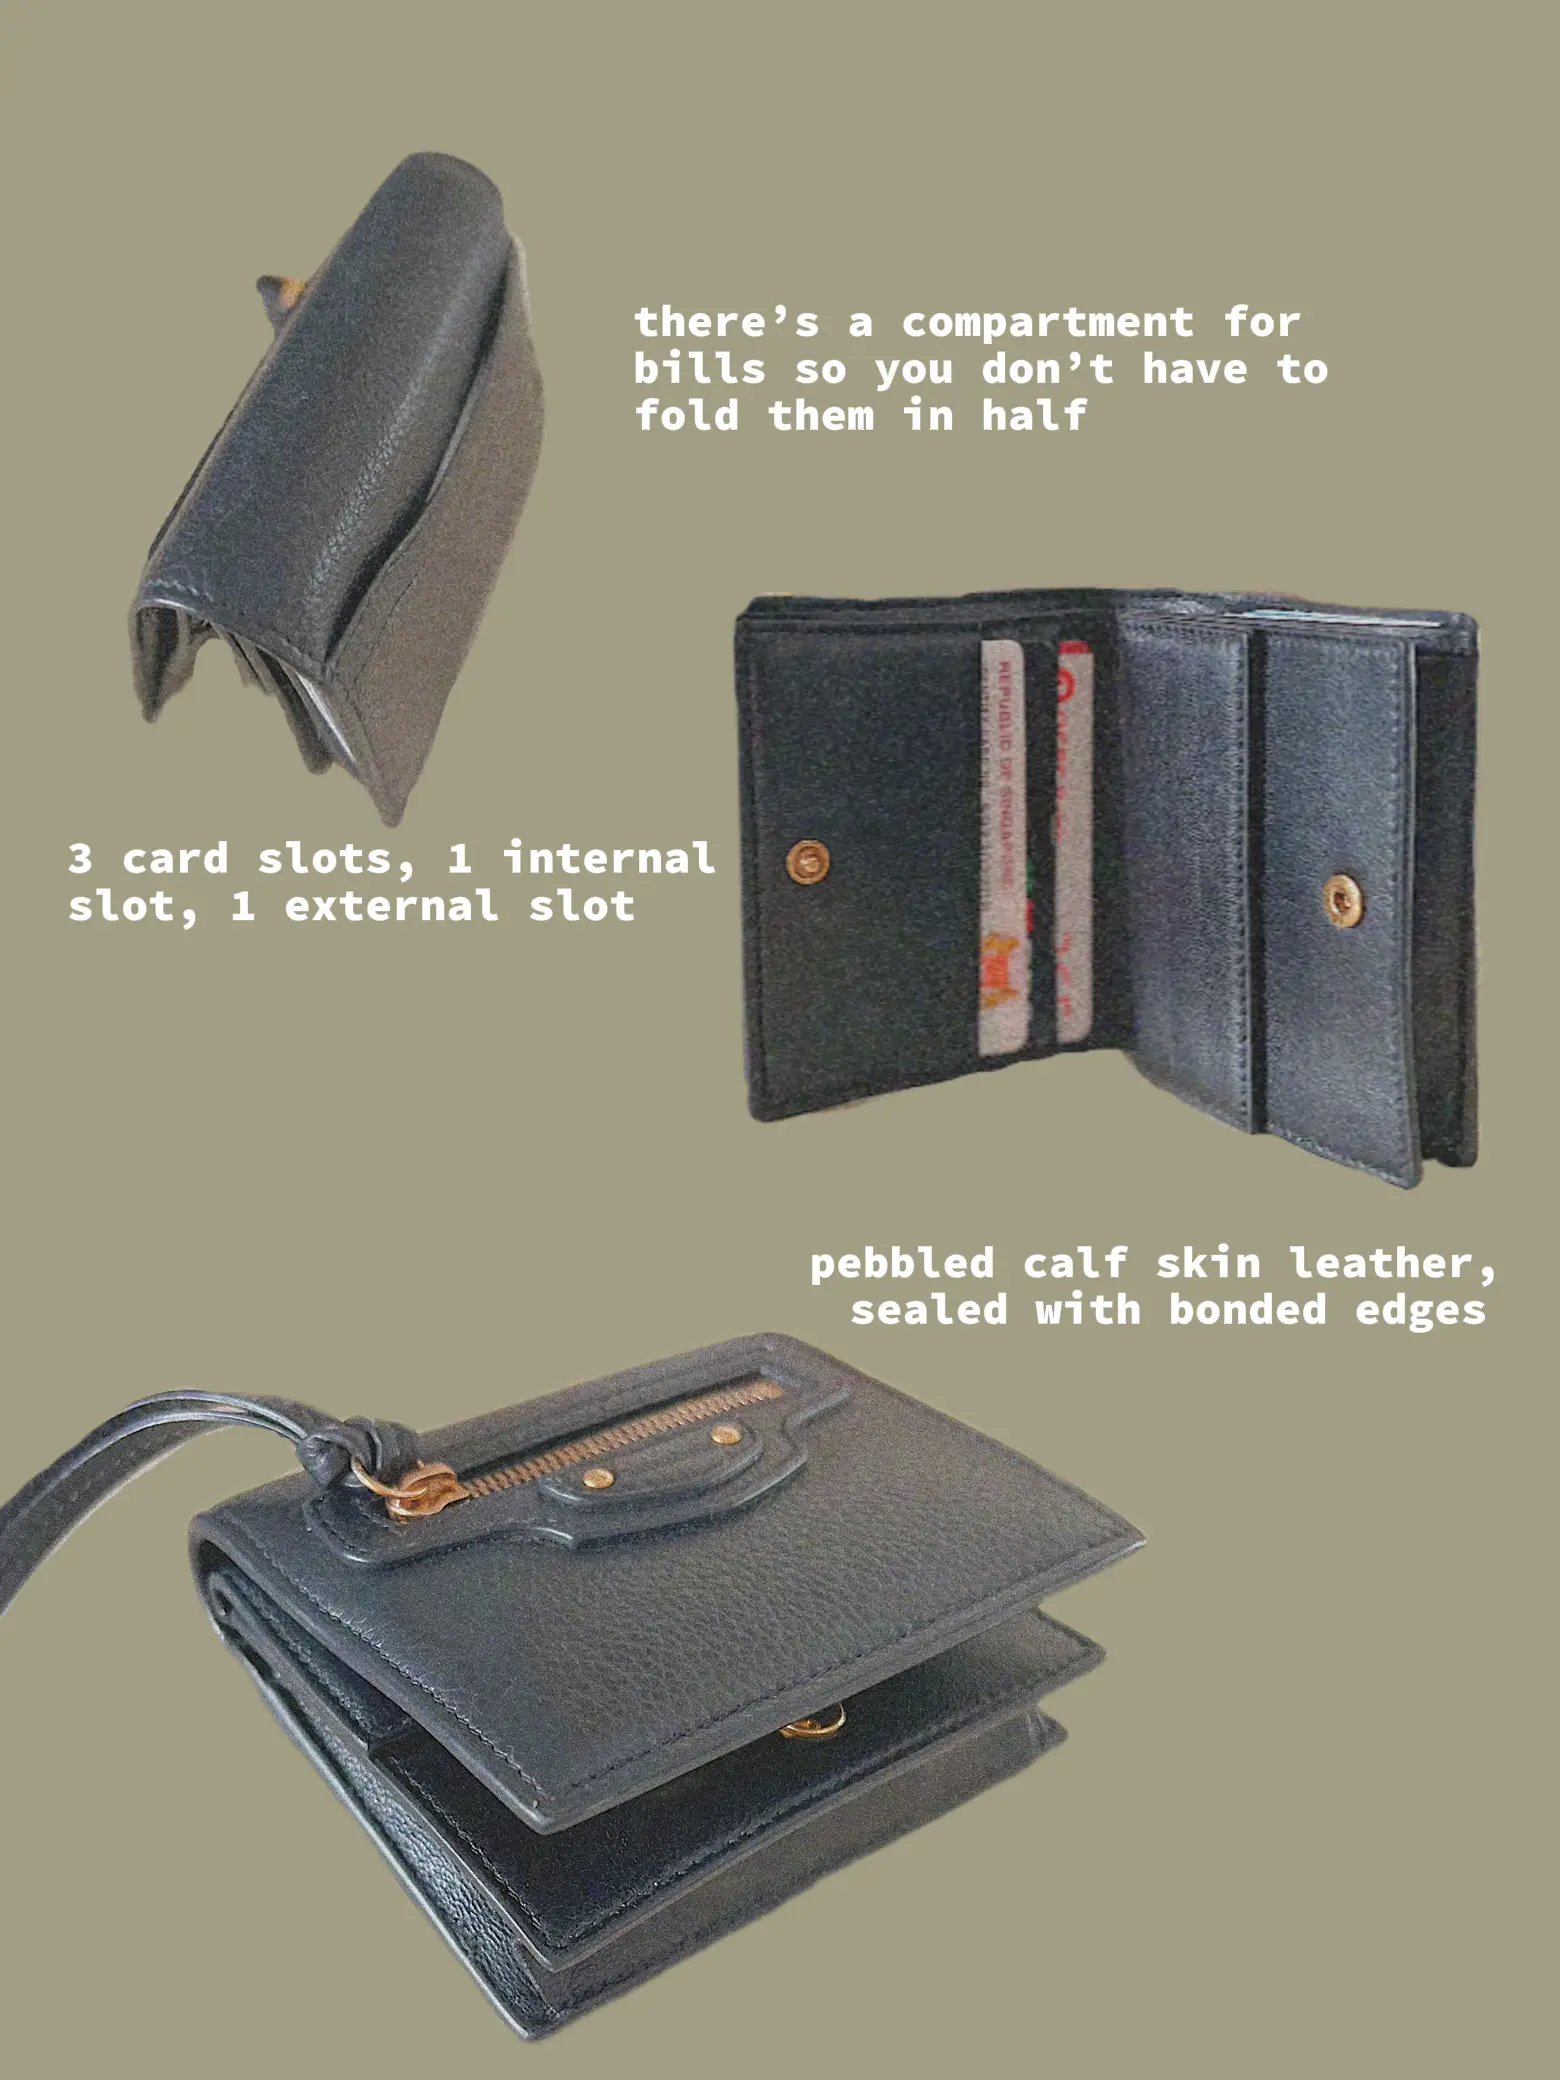 LOUIS VUITTON MICRO WALLET REVIEW &COMPARISON /Which one will you pick? 